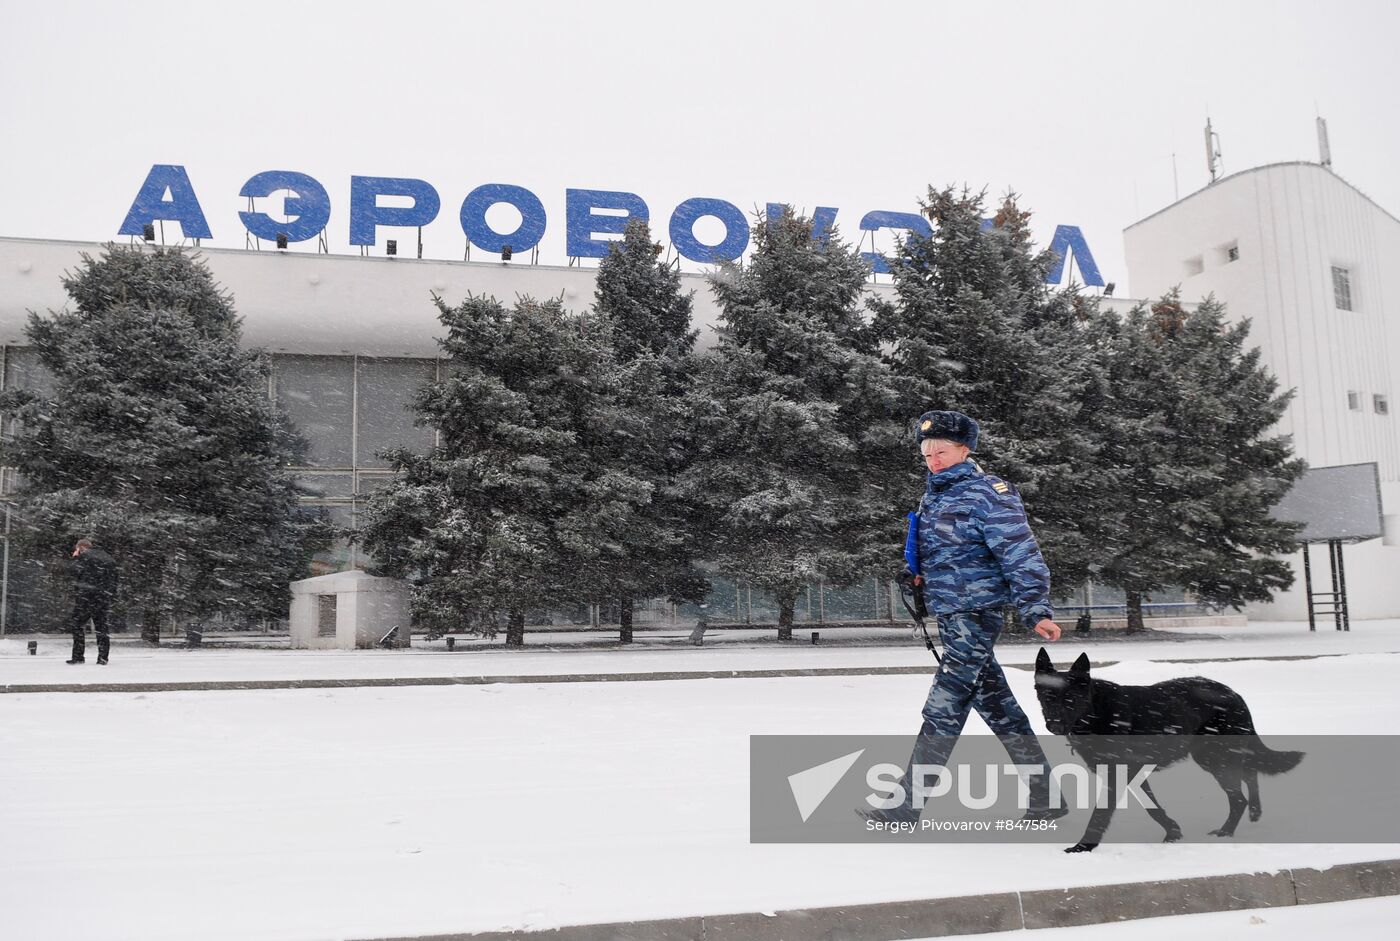 Tightening security measures at the Rostov-on-Don airport